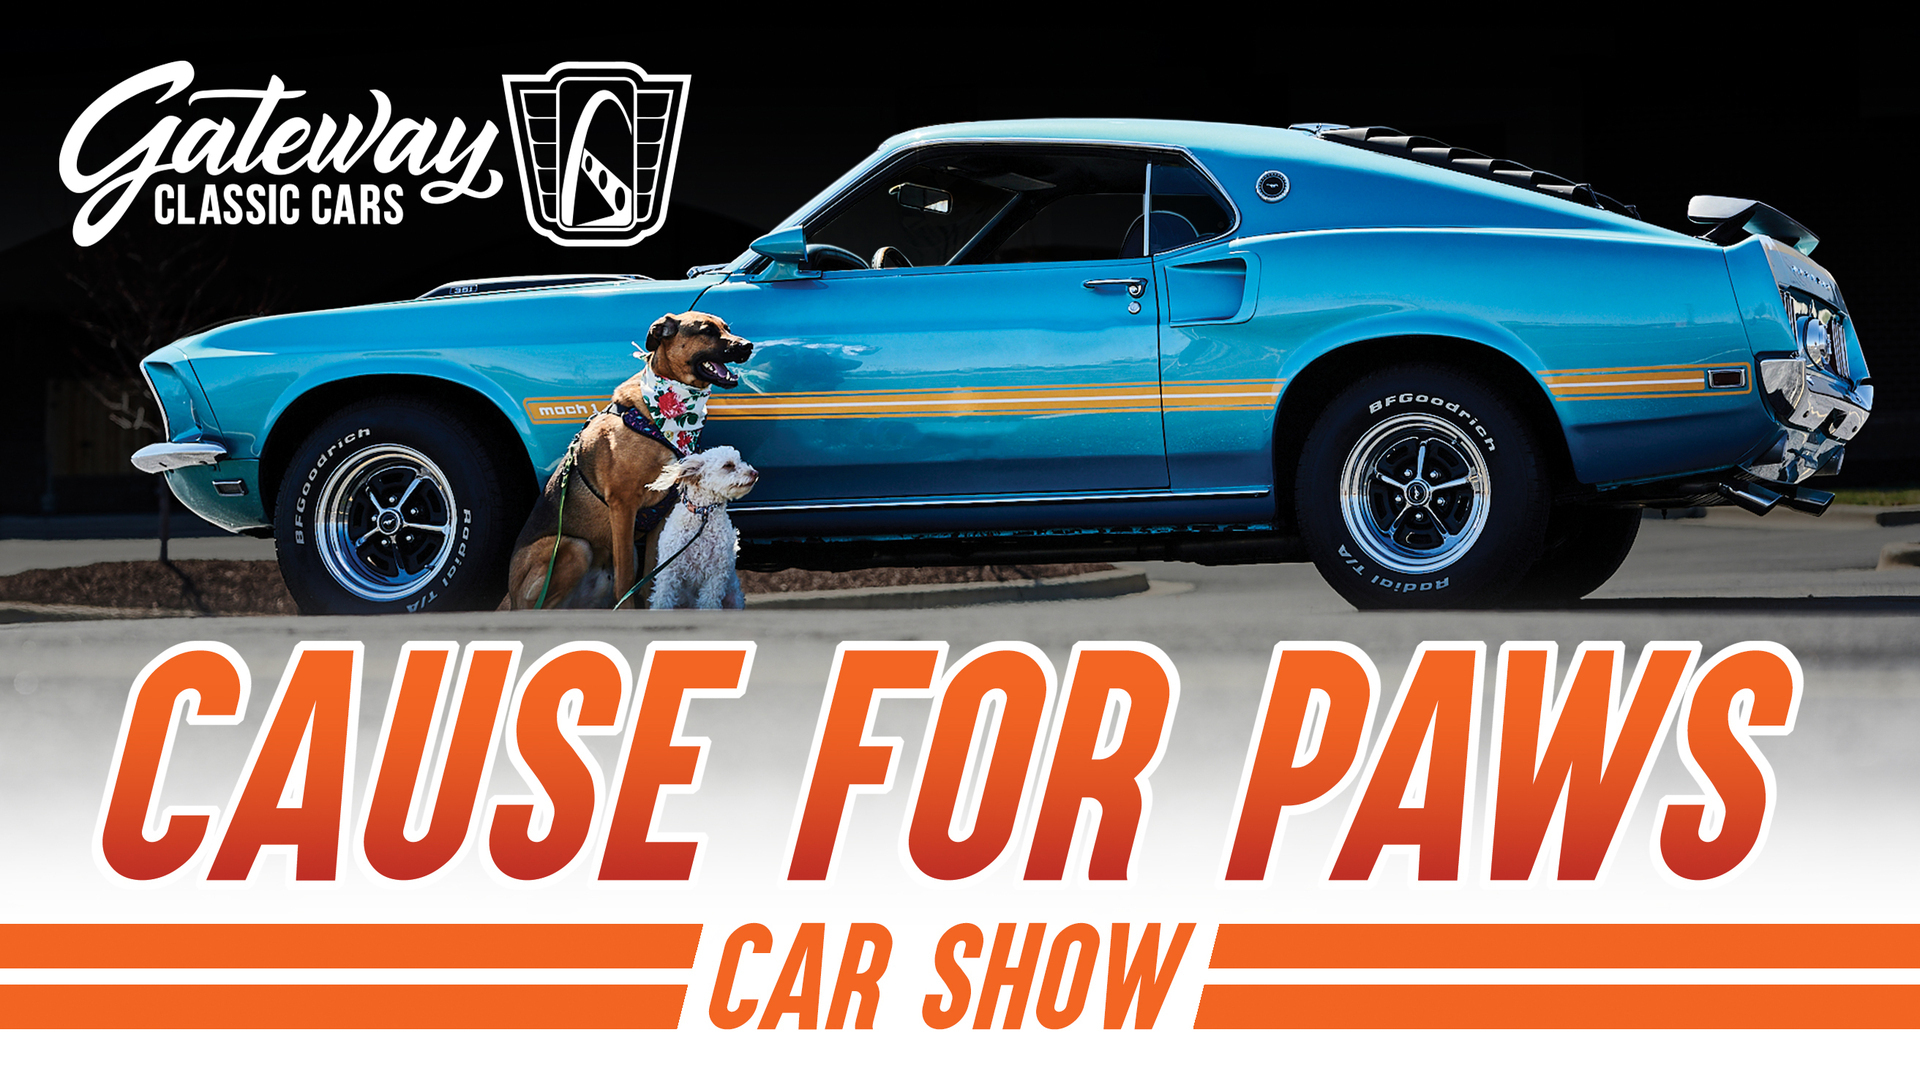 Cause for Paws at Caffeine and Chrome, Gateway Classic Cars of Nashville, Smyrna, Tennessee, United States